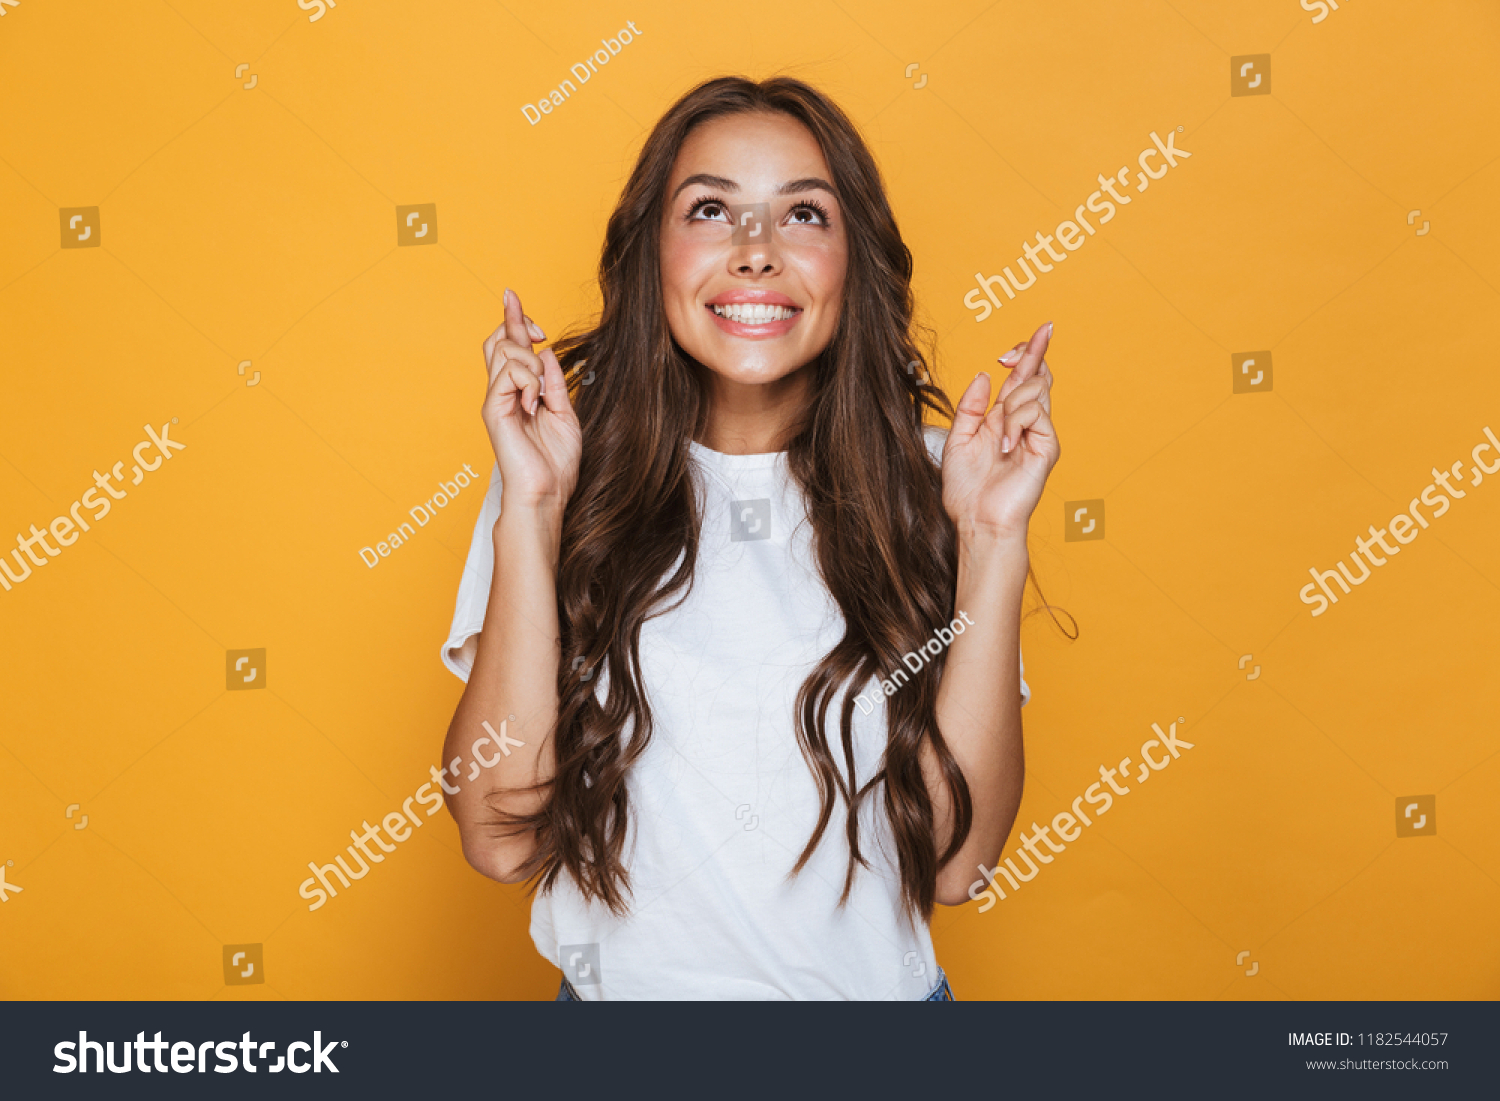 Portrait of a smiling young girl with long brunette hair standing over yellow background, holding fingers crossed for good luck #1182544057